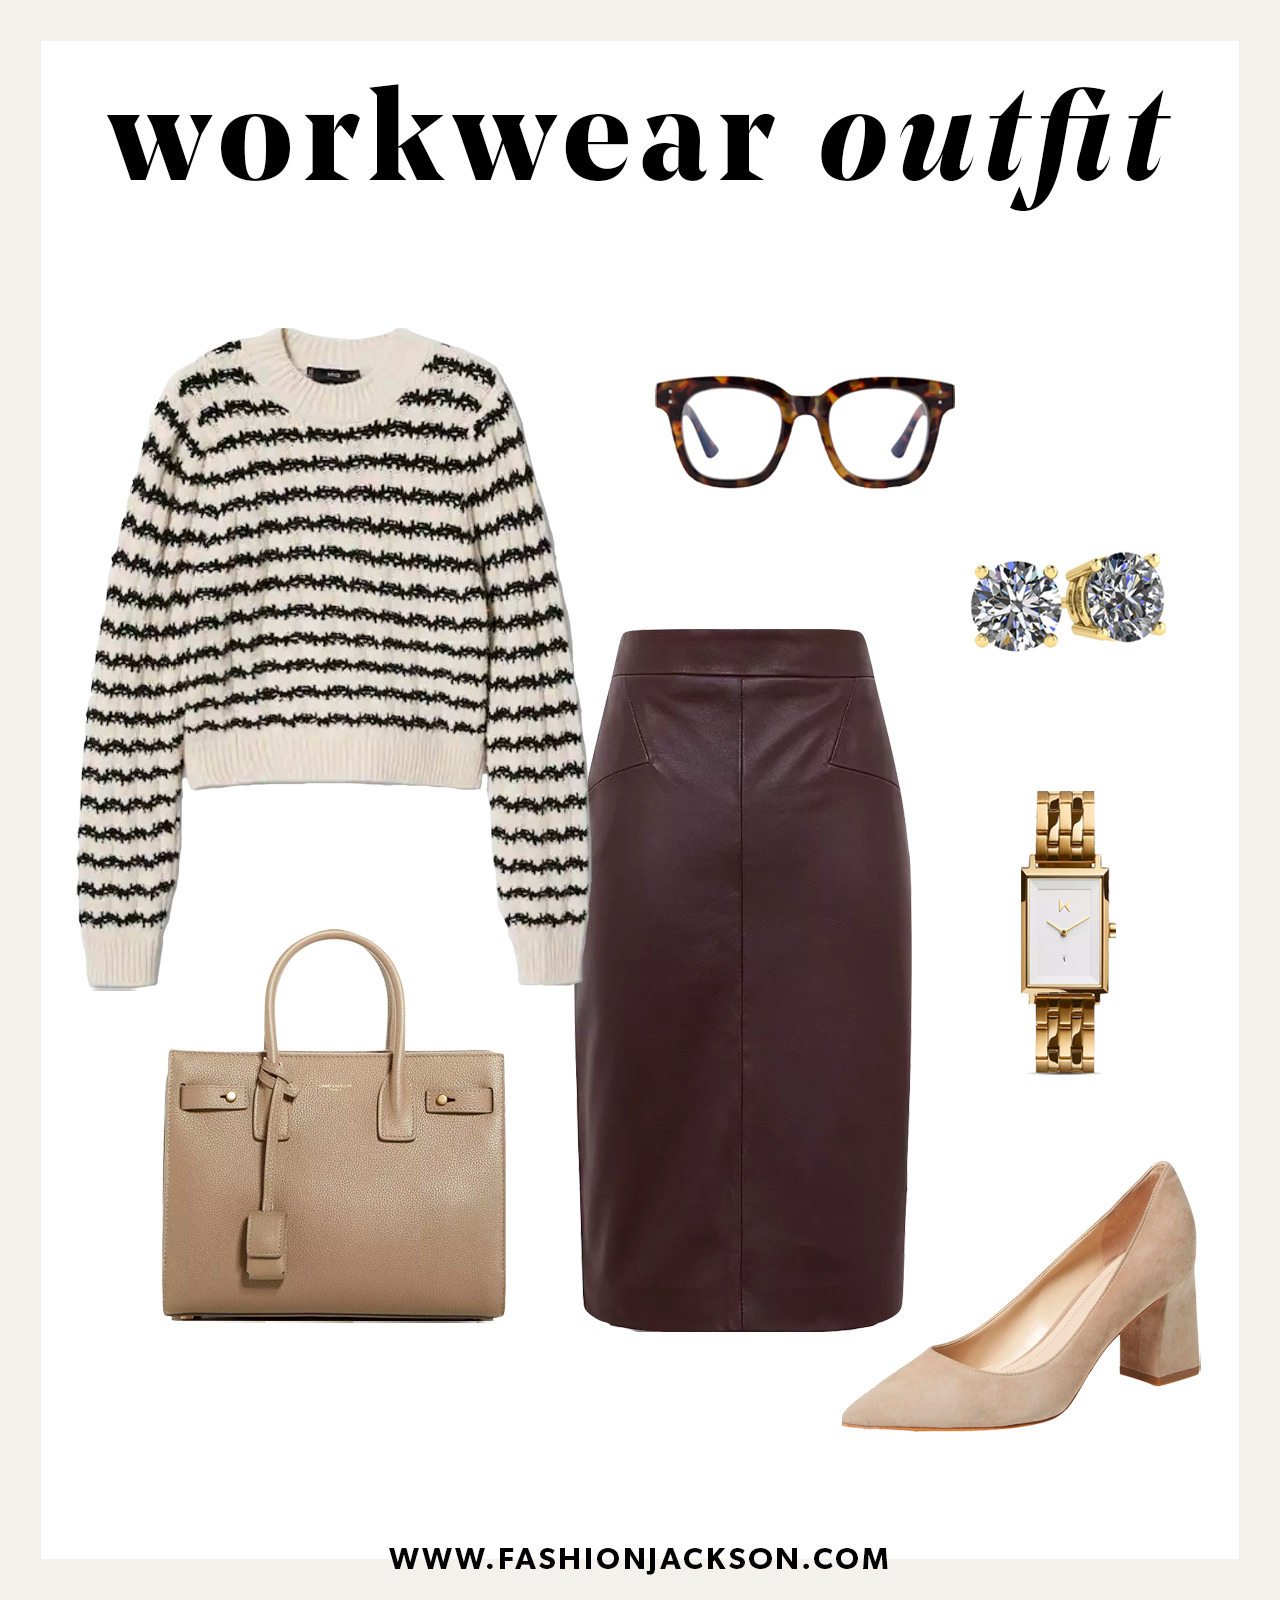 fall work outfits for 2022, workwear trends 2022, womens fall work clothes, modern workwear looks, workwear outfit ideas, workwear outfit inspiration, womens workwear essentials